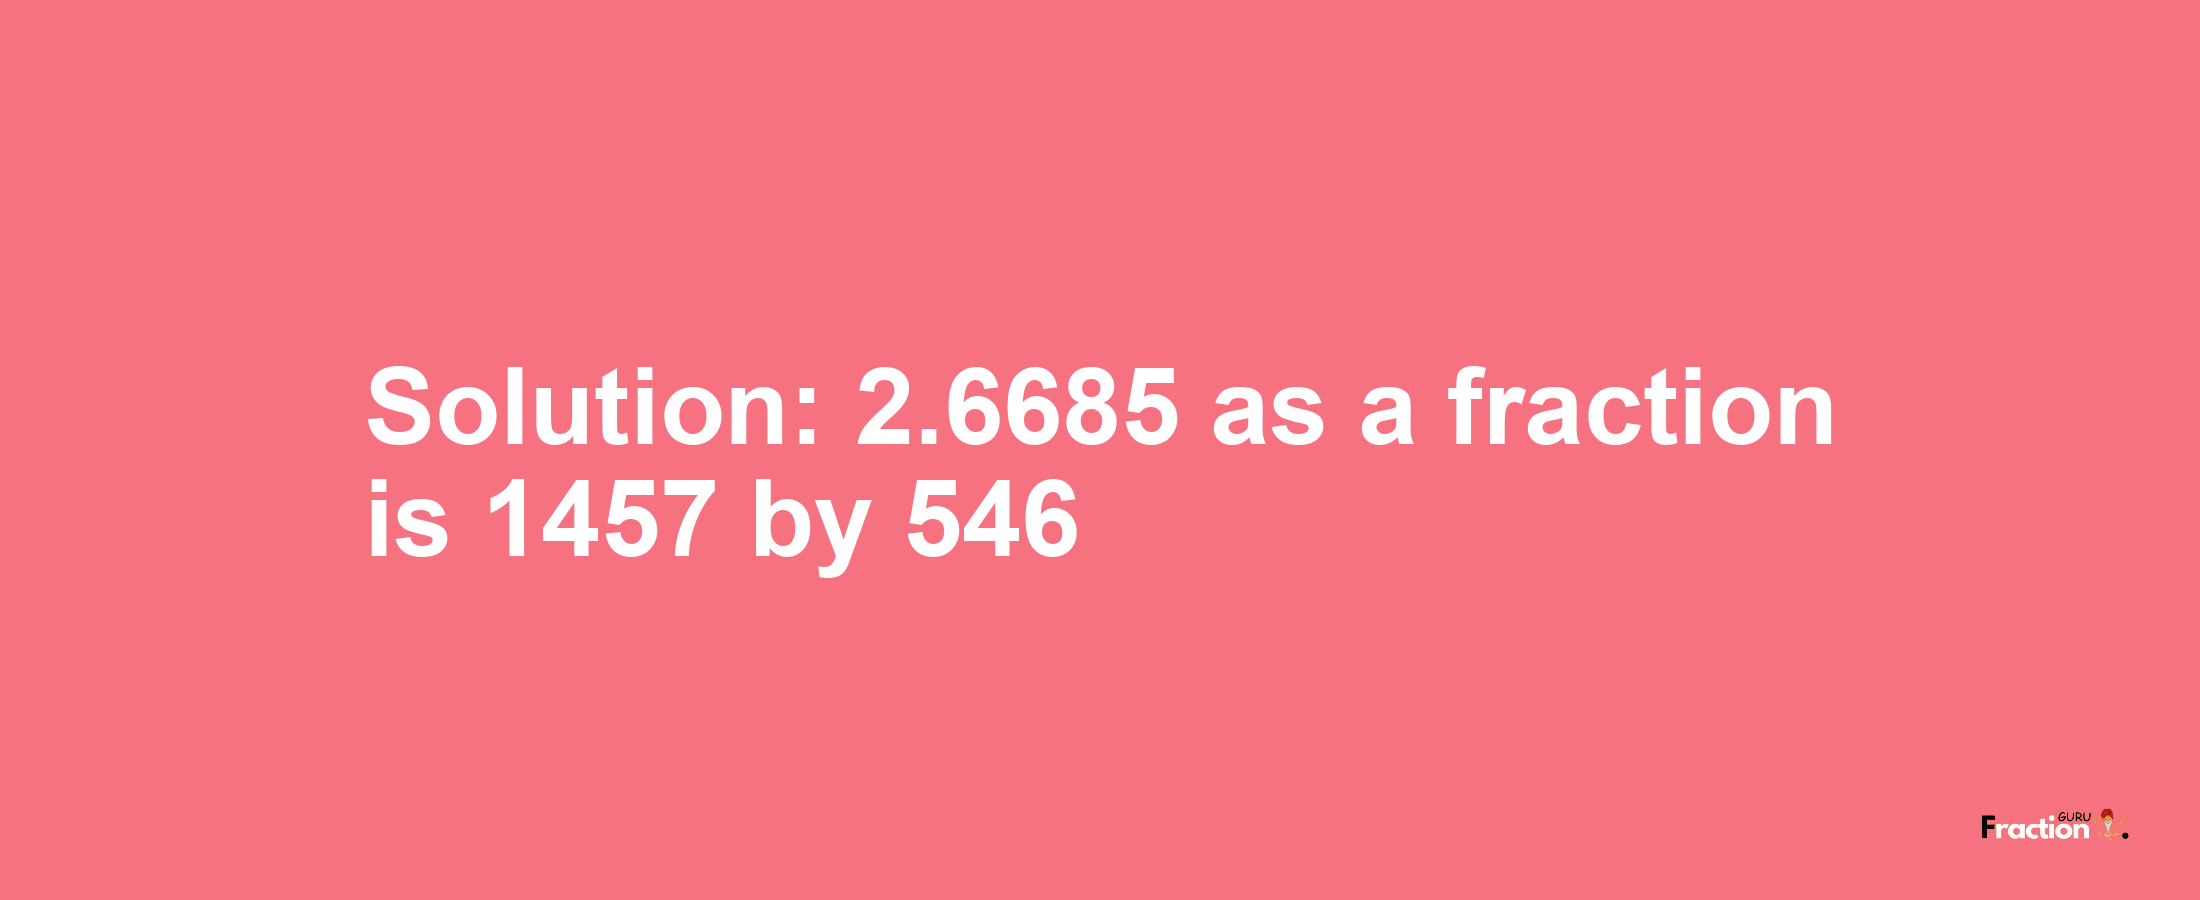 Solution:2.6685 as a fraction is 1457/546